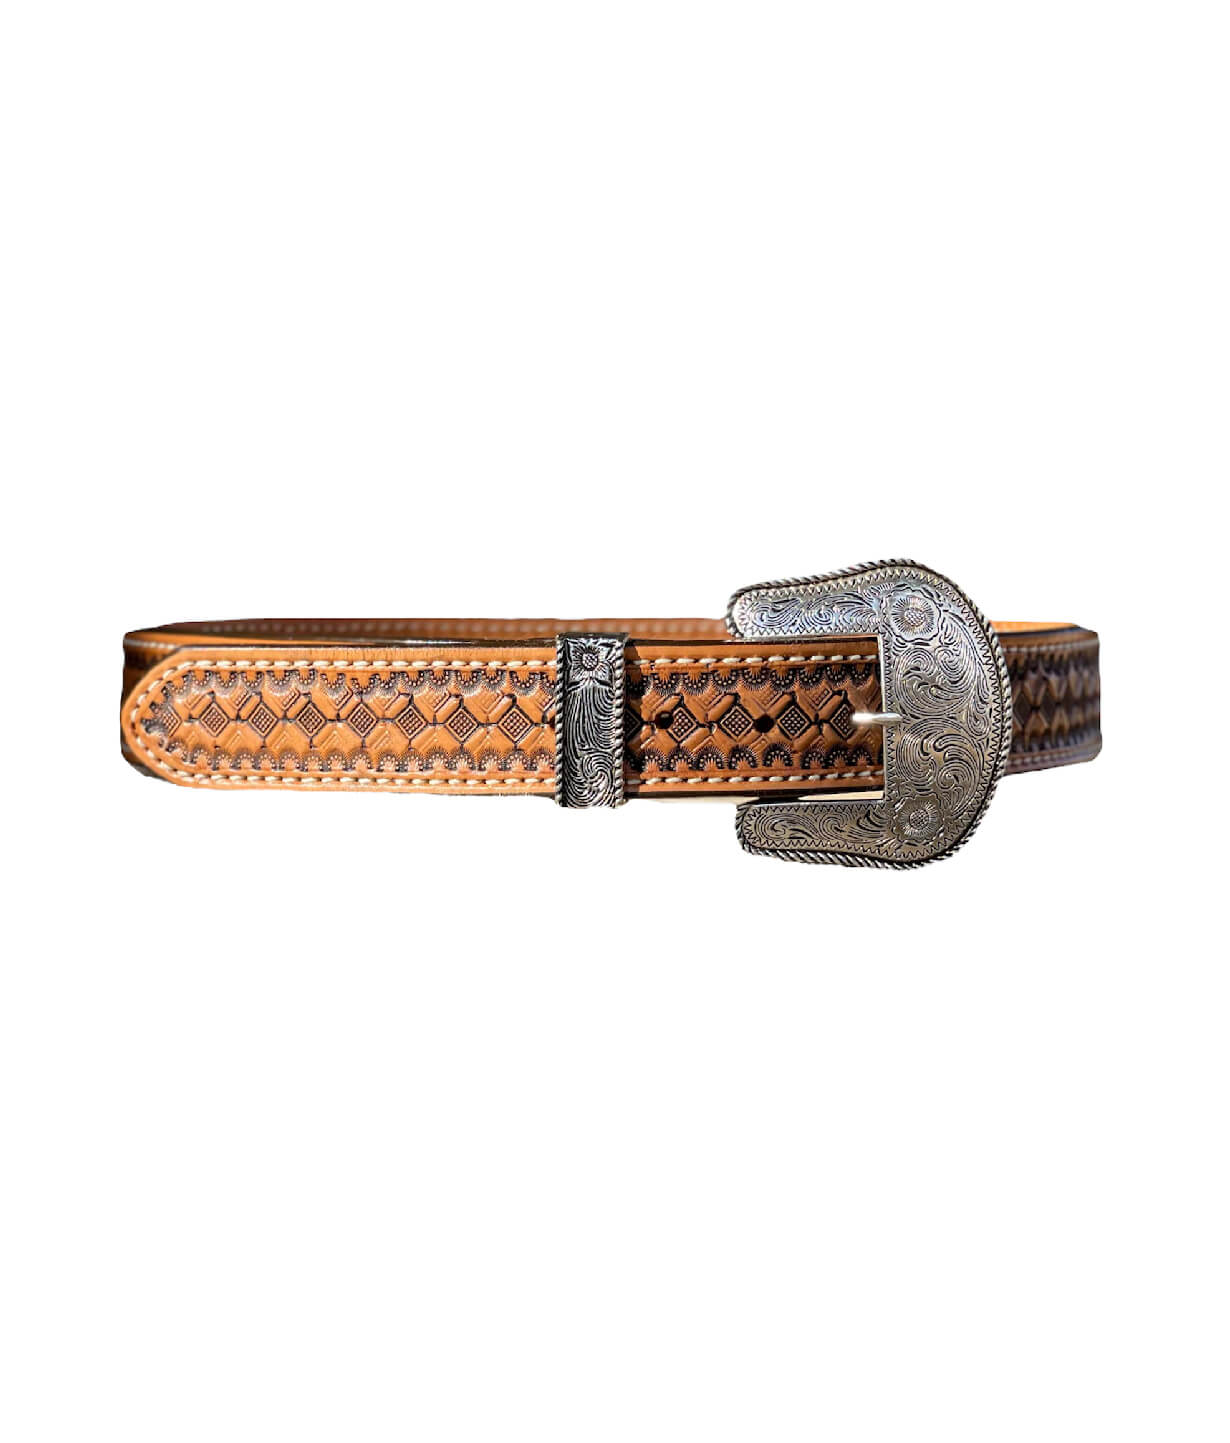 This is our STRAIGHT golden leather belt with waffle tooling and an antique finish. It comes with a silver belt buckle and silver belt loop.